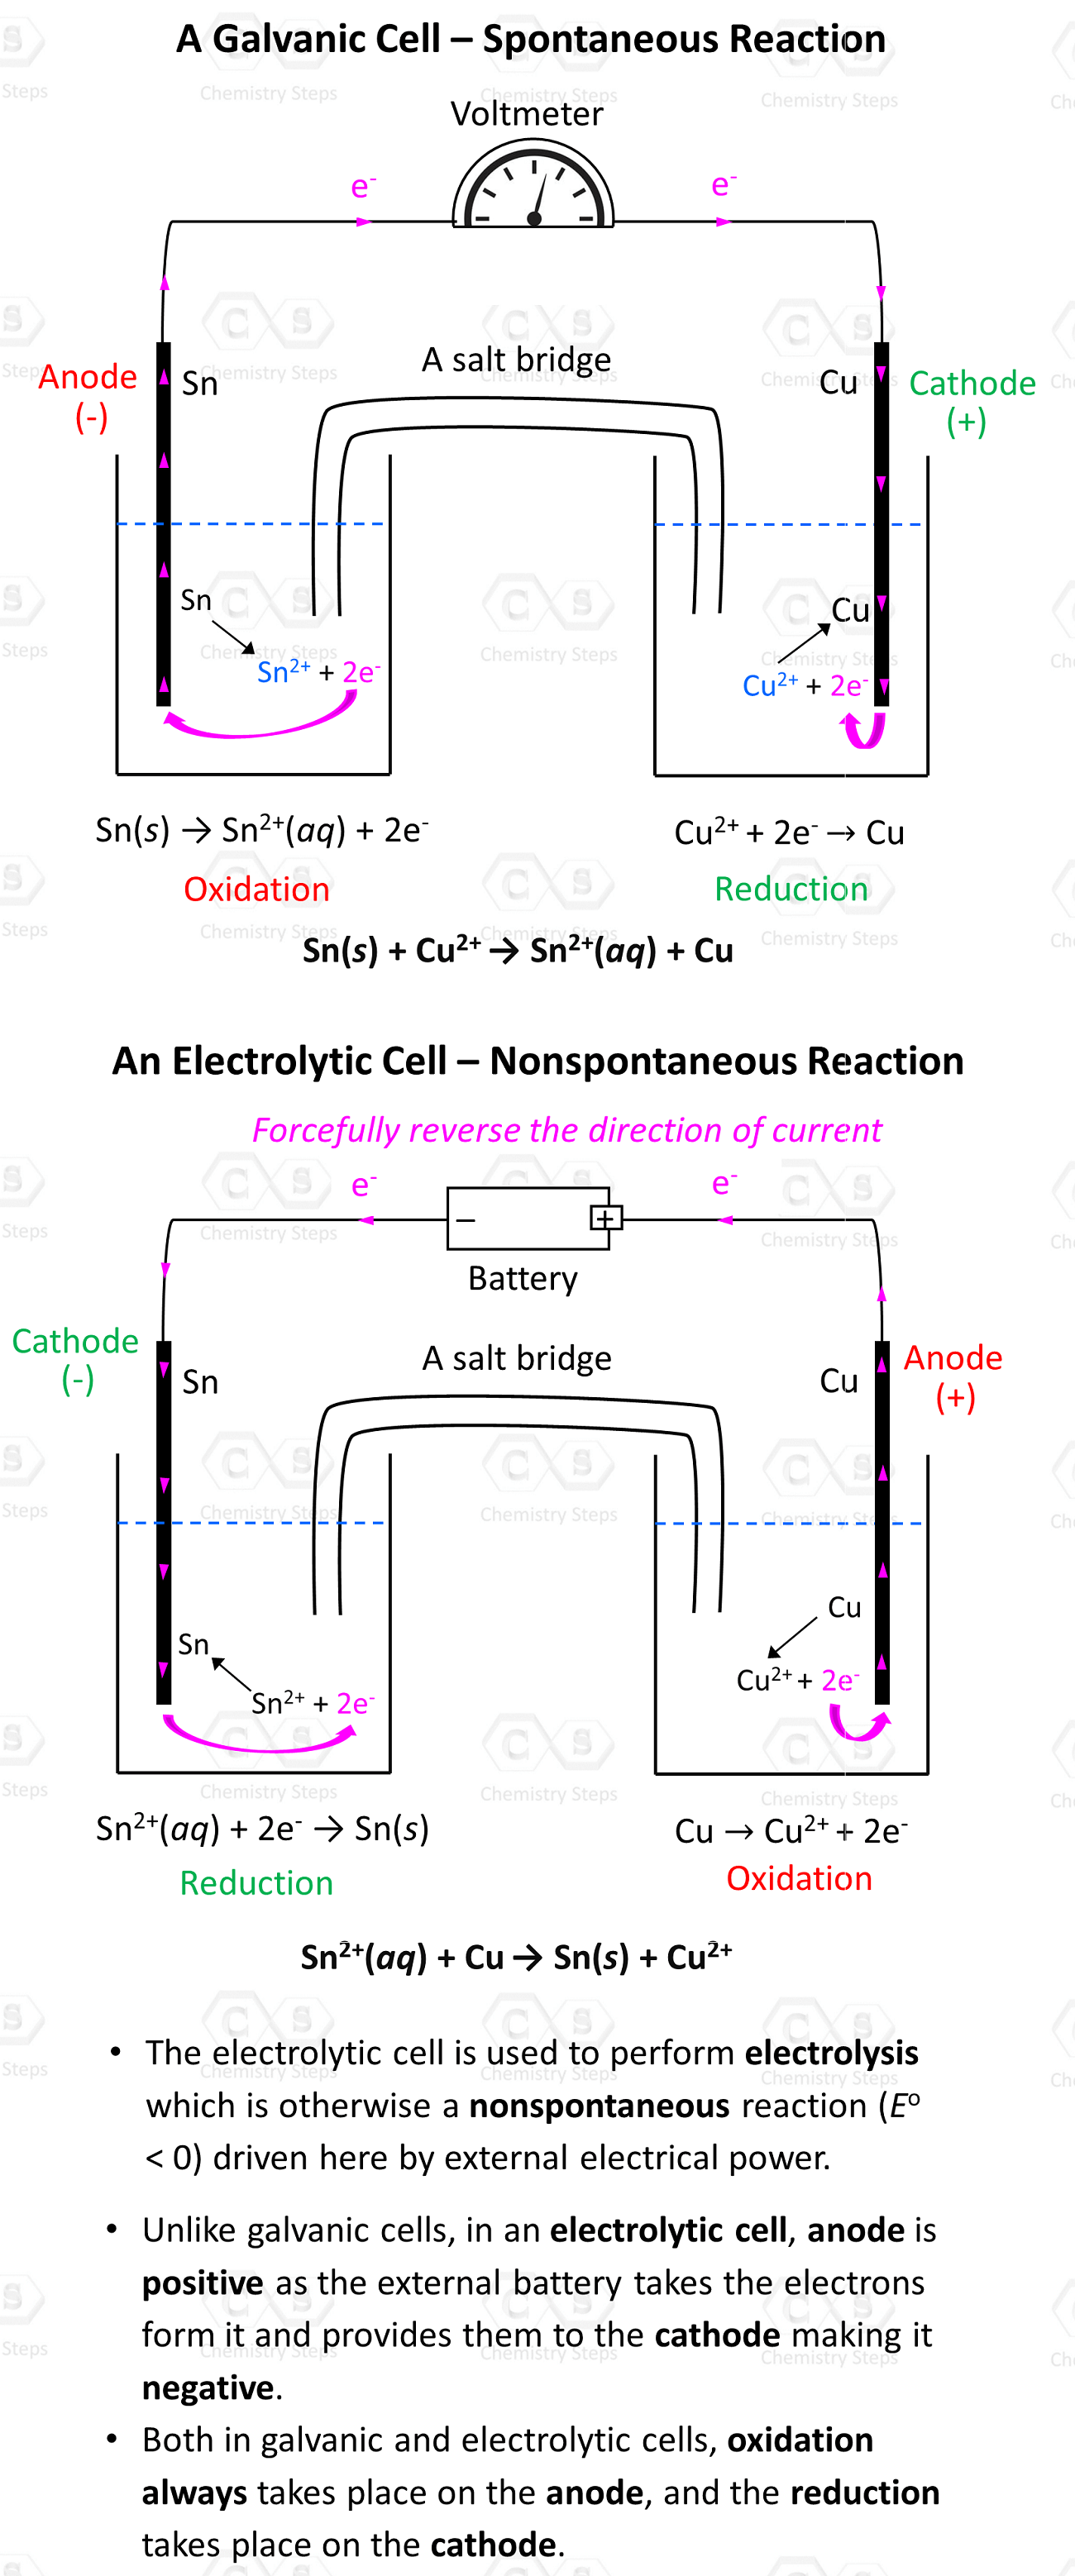 Difference between galvanic and electrolytic cells